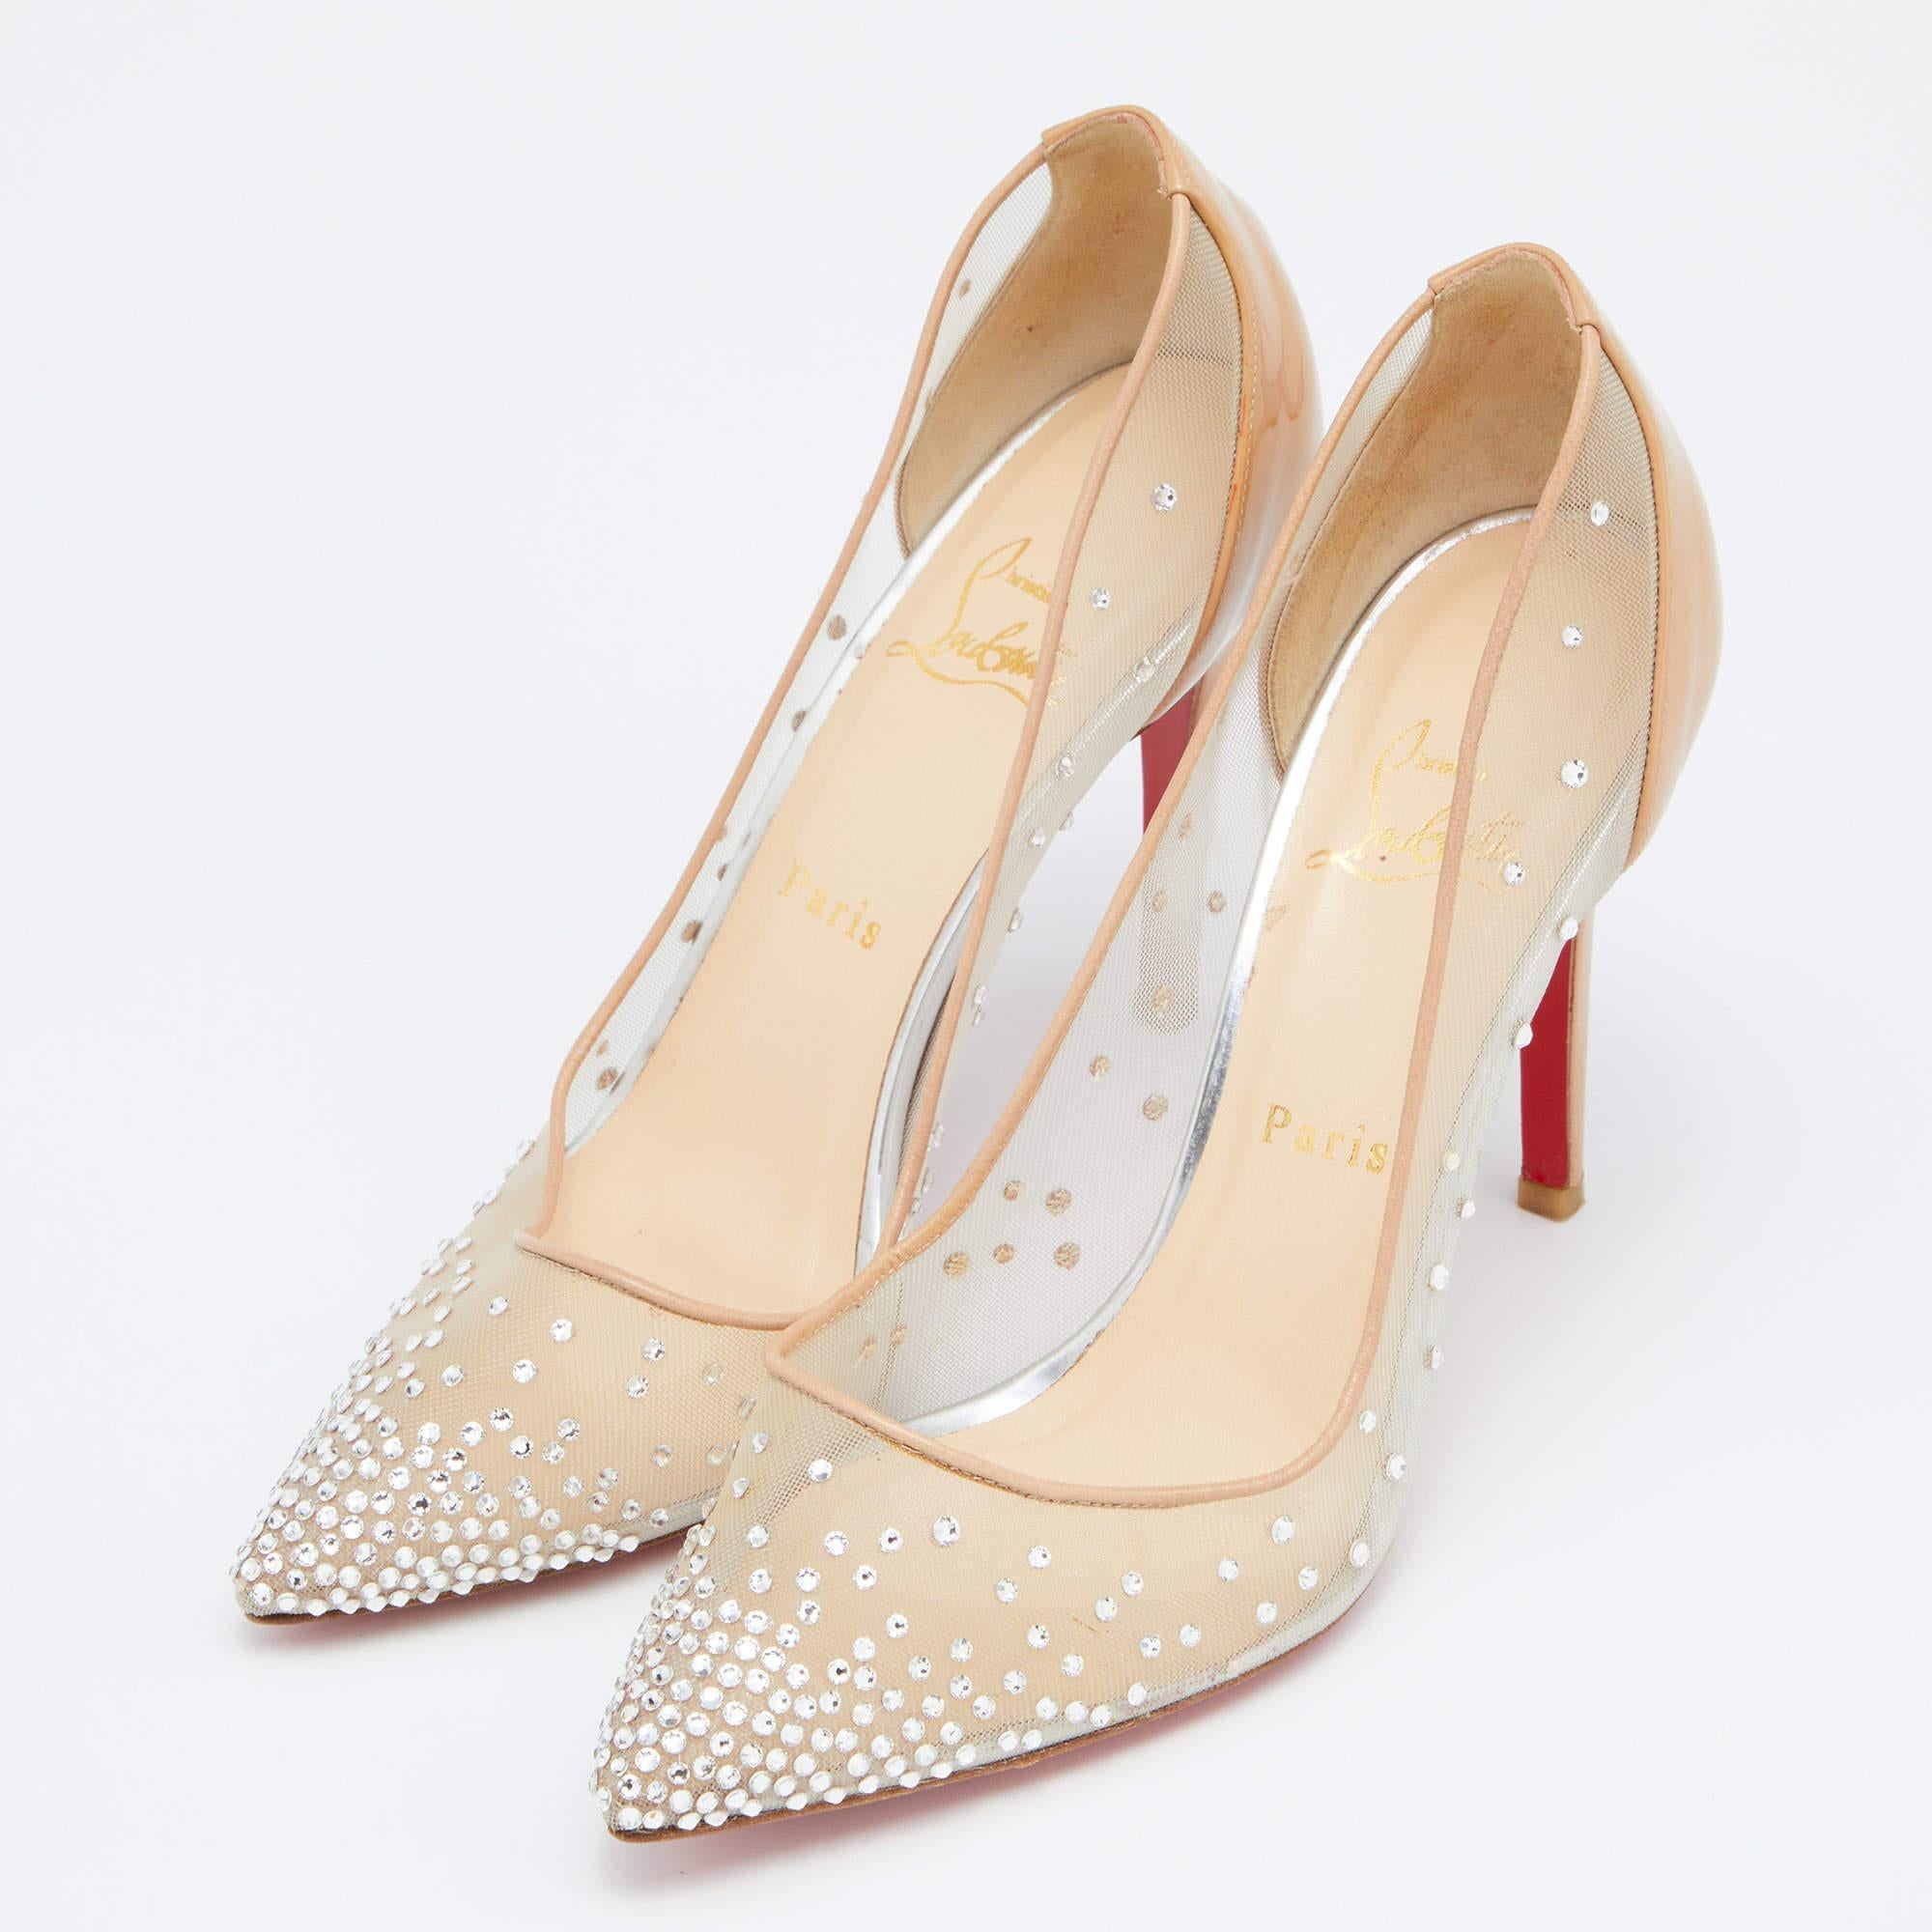 Women's Christian Louboutin Beige Mesh and Patent Leather Follies Strass Pumps Size 39